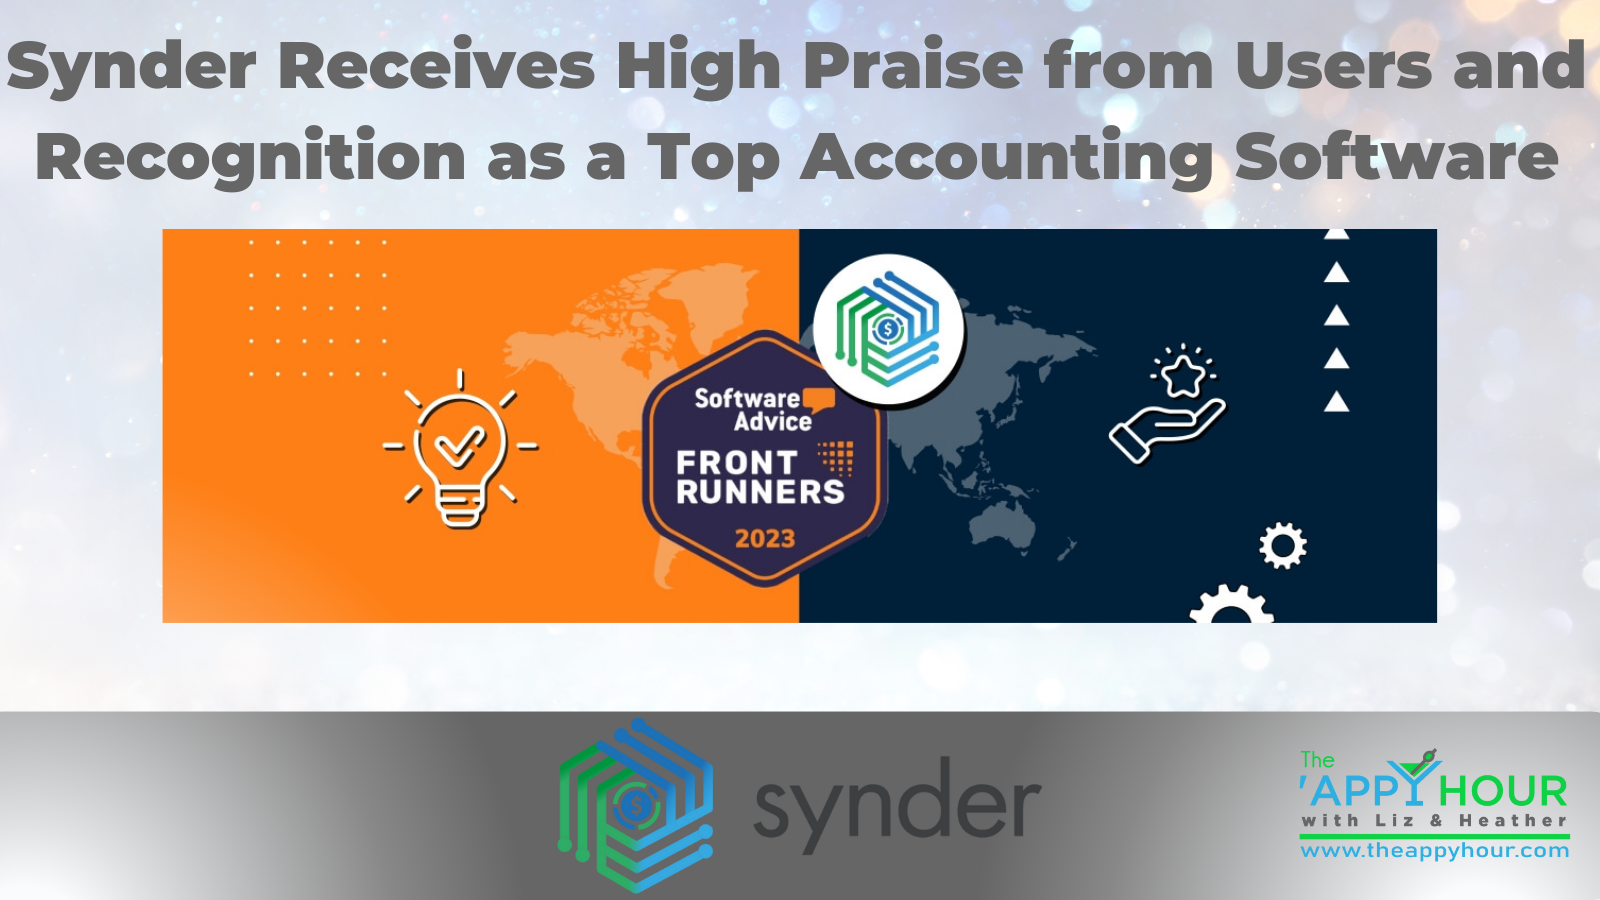 Synder Receives High Praise from Users and Recognition as a Top Accounting Software